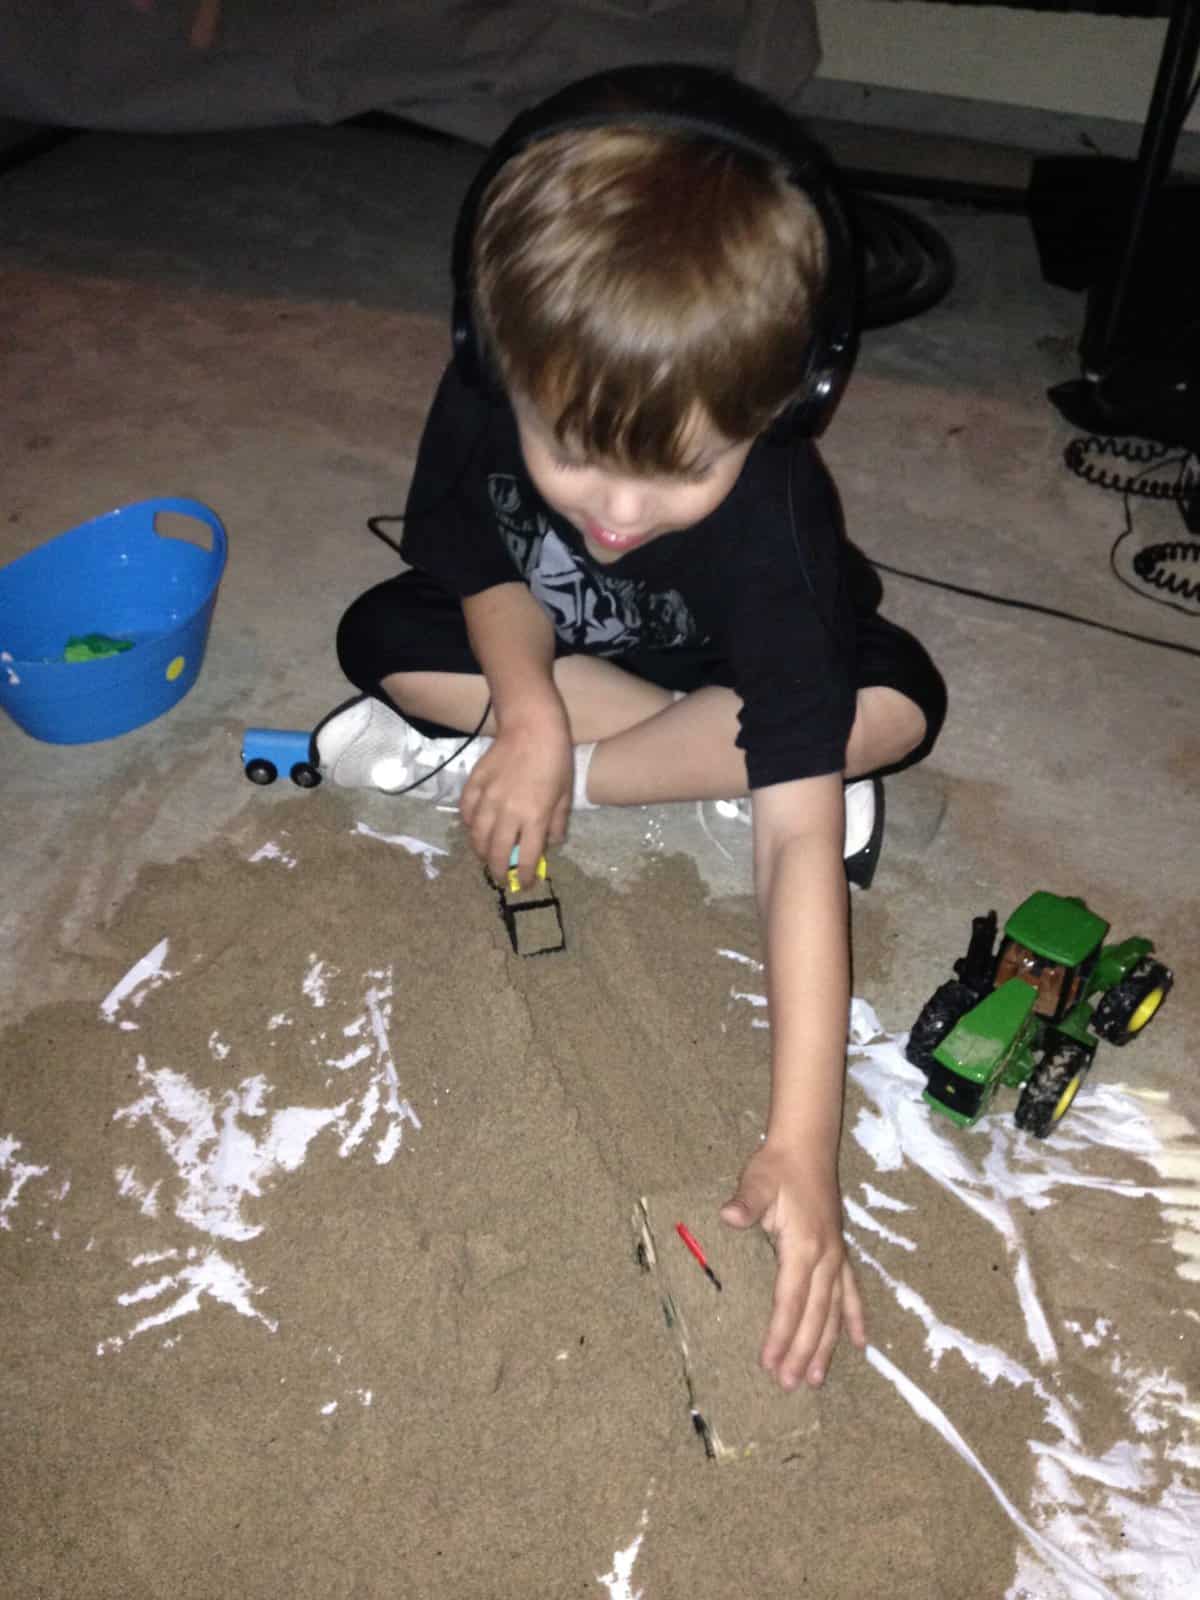 Preschooler wearing headphones listening to In-home Berard-Based Auditory Integration Training playing in the sand with trucks